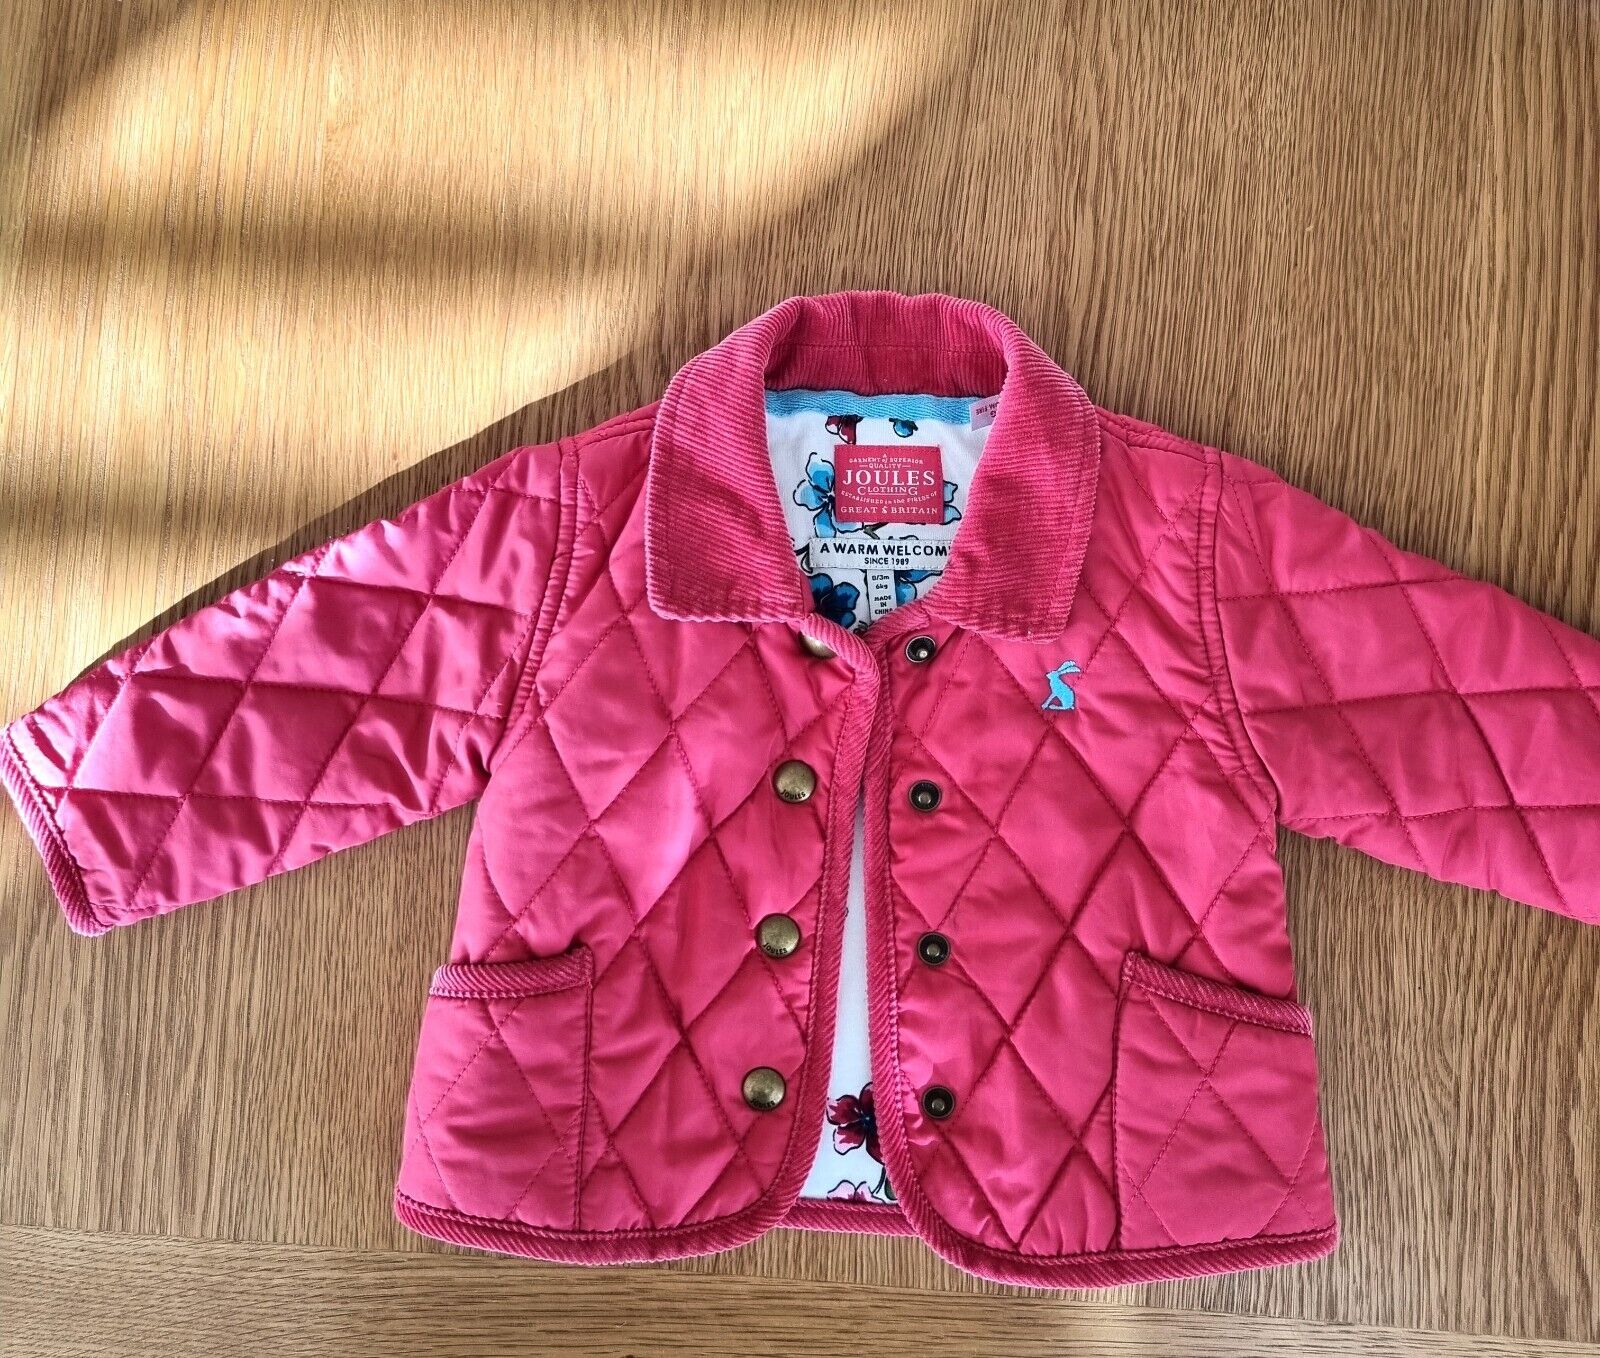 Girls Joules Quilted Coat Age 0-3 Months Pink Poppers Excellent Condition - Bonnie Lassio